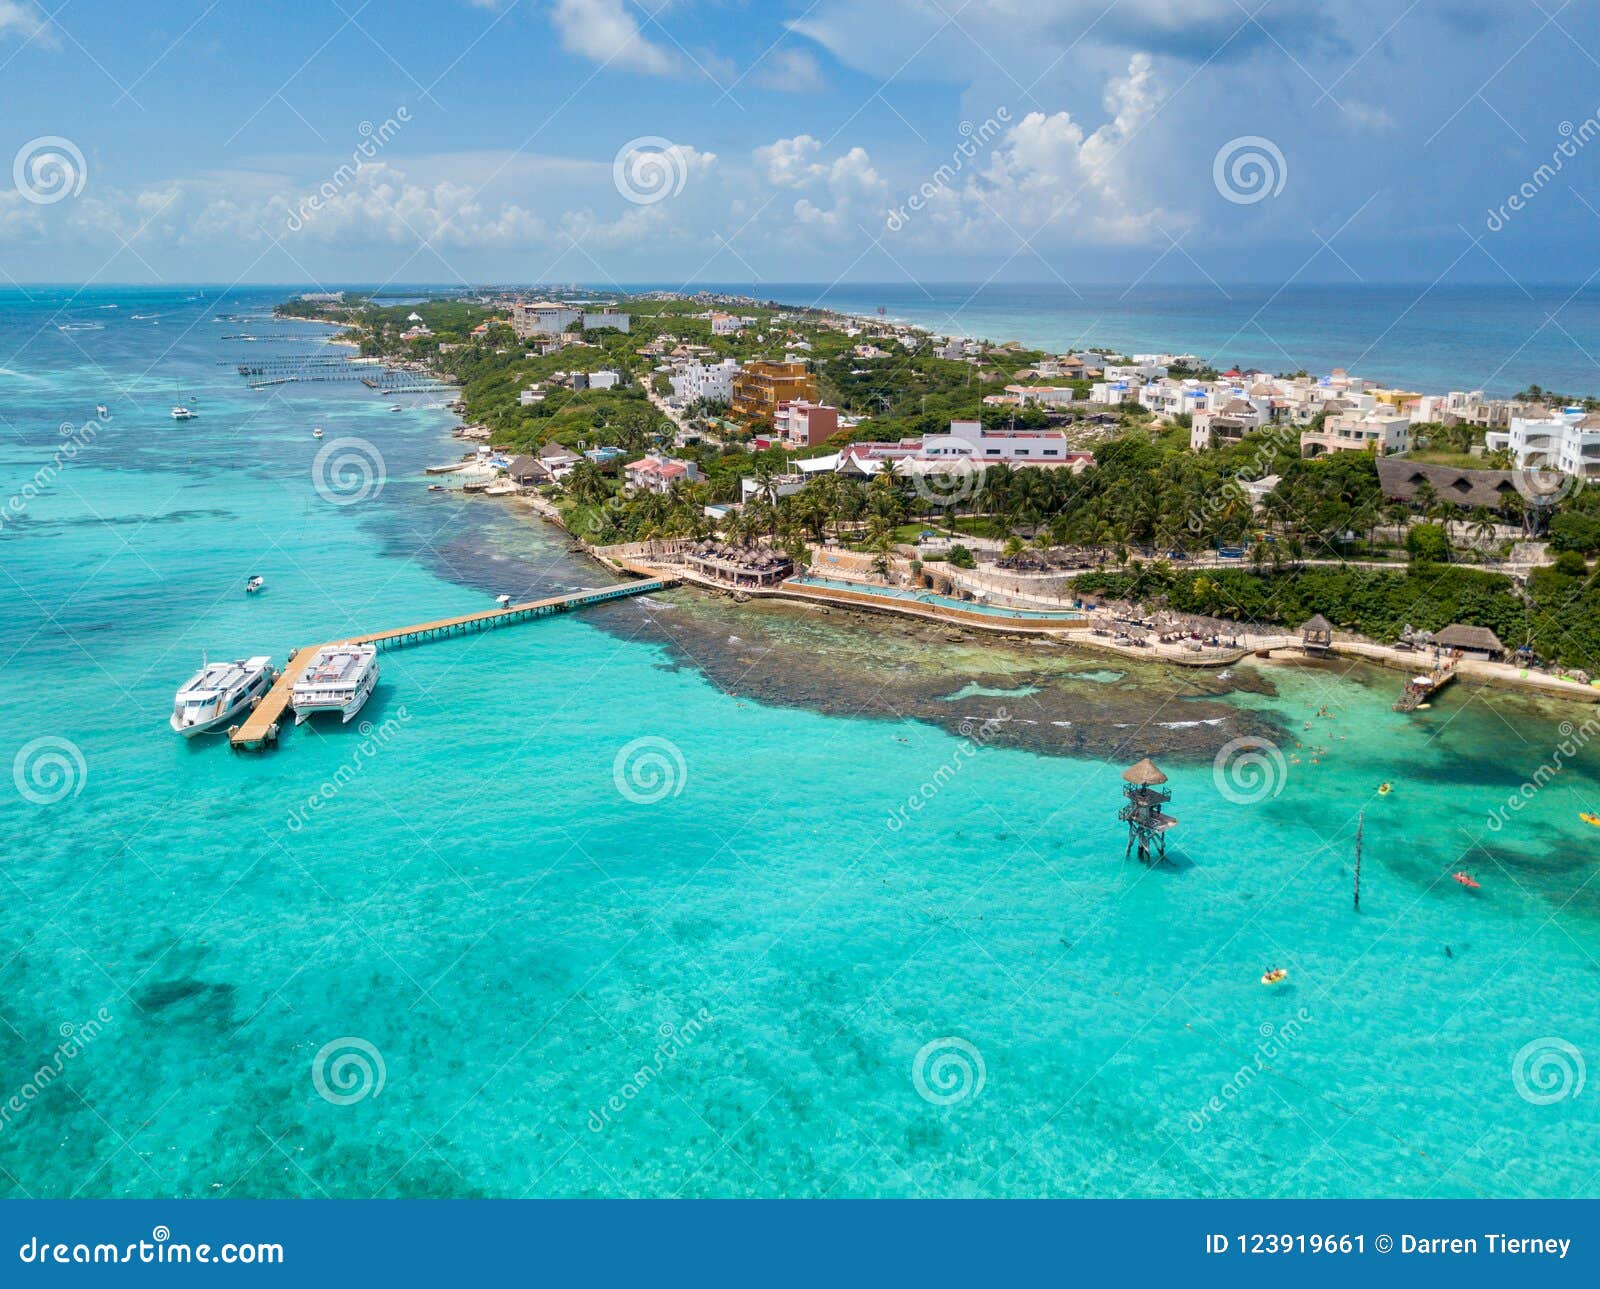 an aerial view of isla mujeres in cancun, mexico